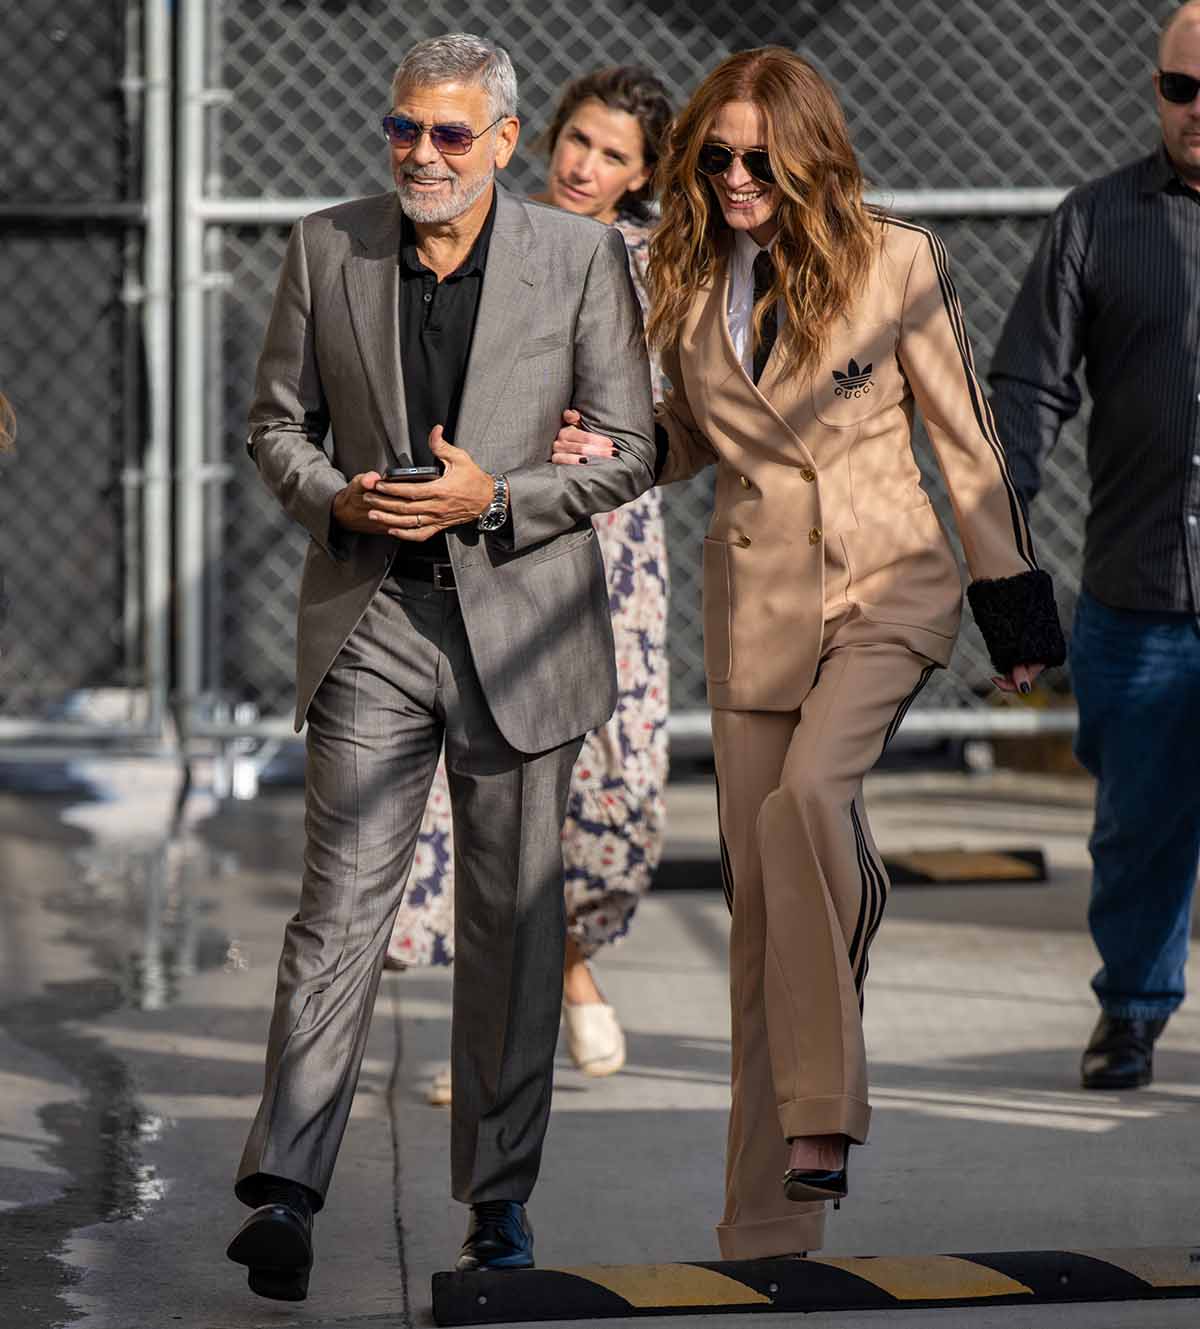 George Clooney and Julia Roberts coordinate in suits for their Jimmy Kimmel Live guest appearance on October 13, 2022